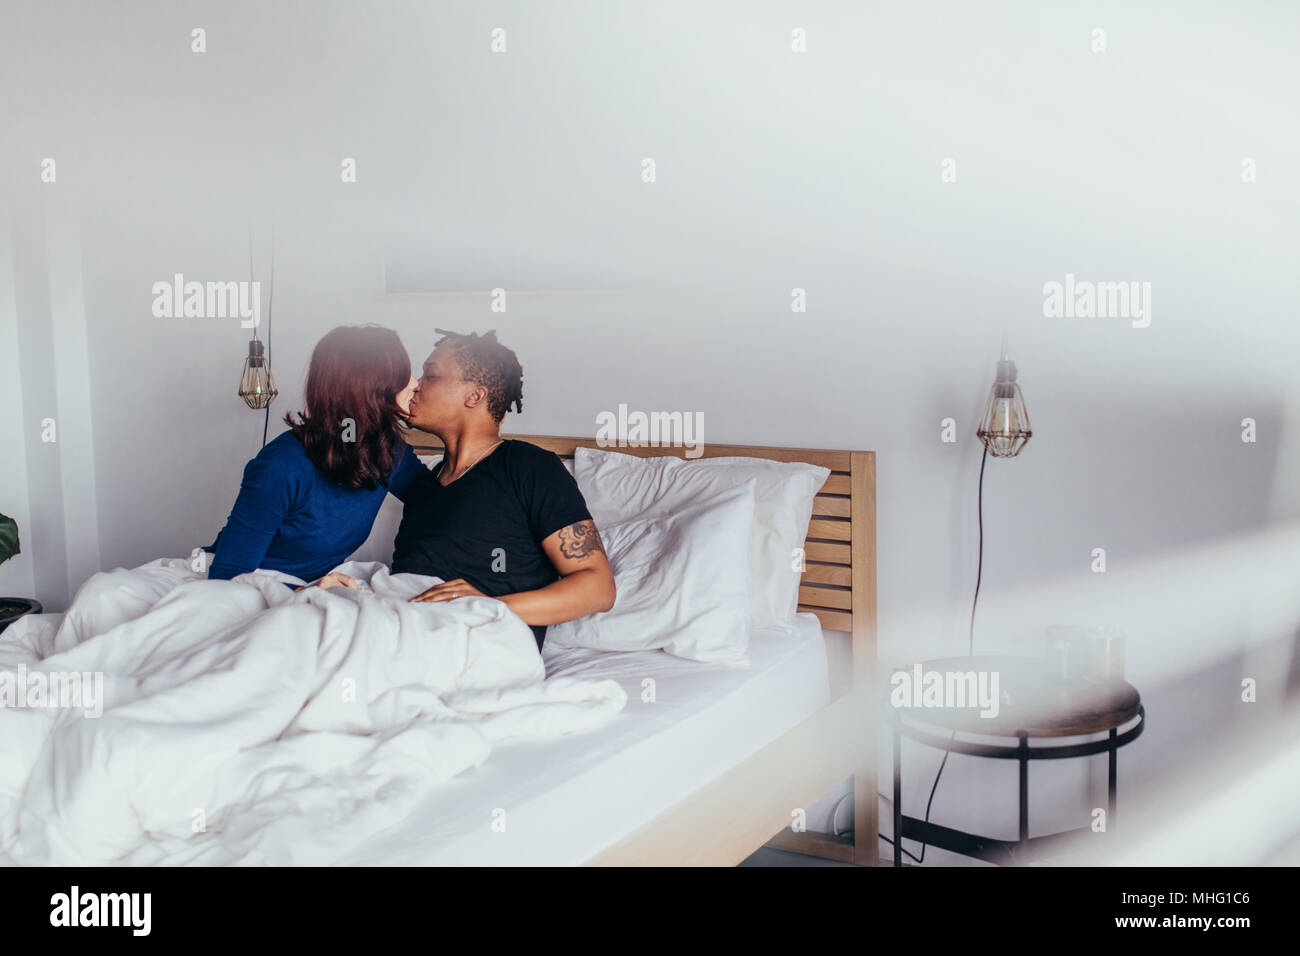 Romantic couple kissing in bed. Interracial man and woman sitting on bed and kissing each other. Stock Photo